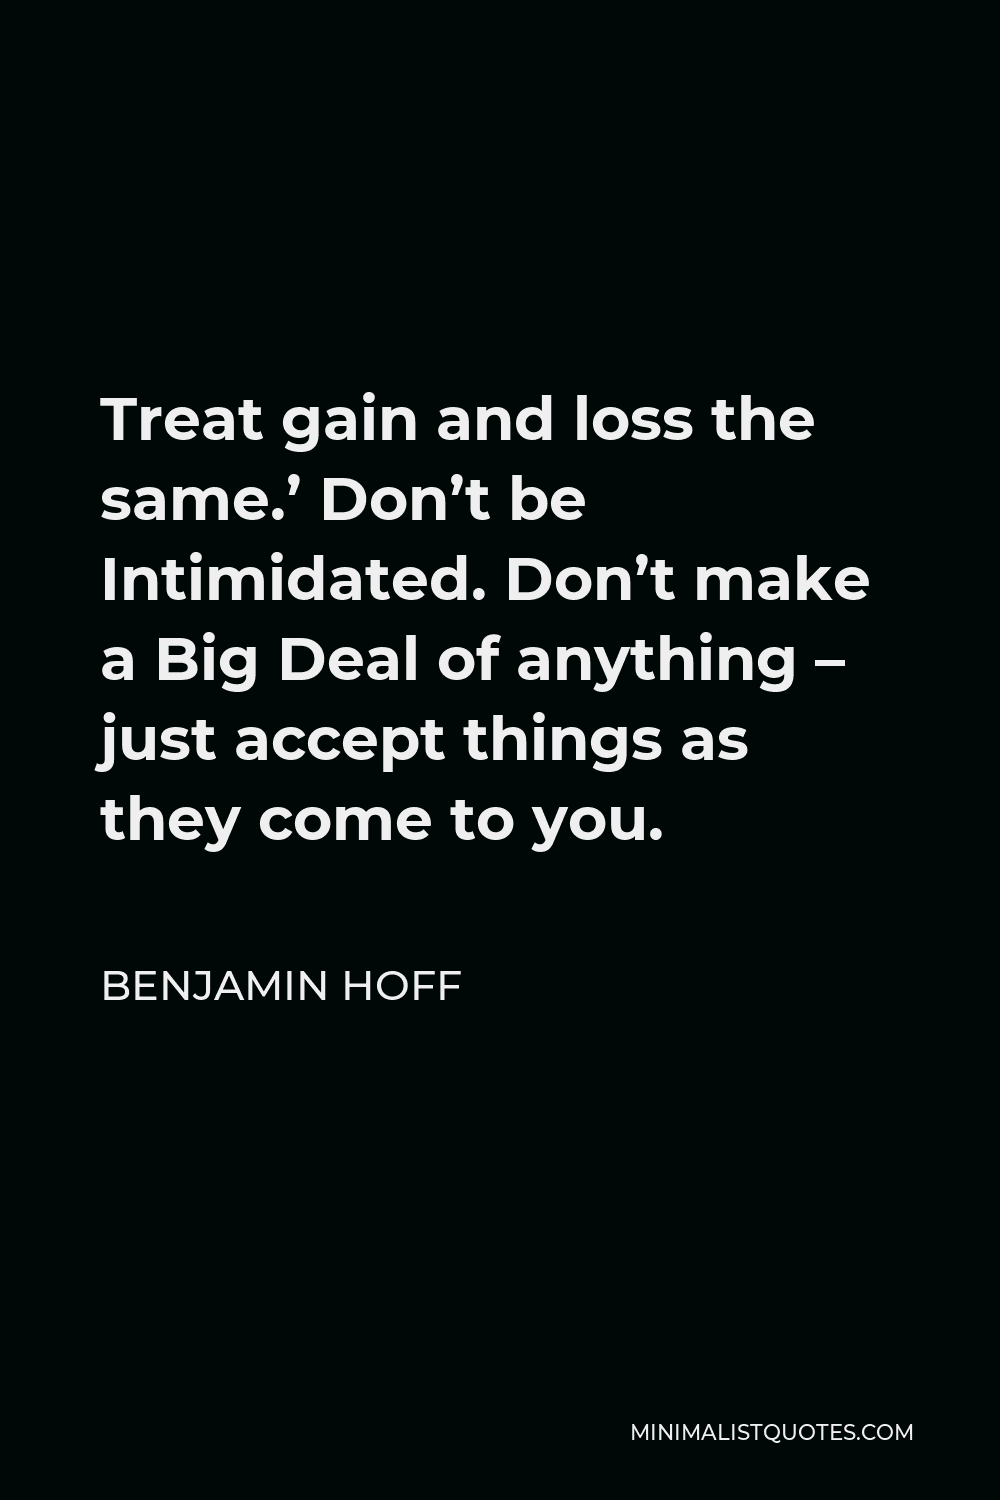 Benjamin Hoff Quote - Treat gain and loss the same.’ Don’t be Intimidated. Don’t make a Big Deal of anything – just accept things as they come to you.